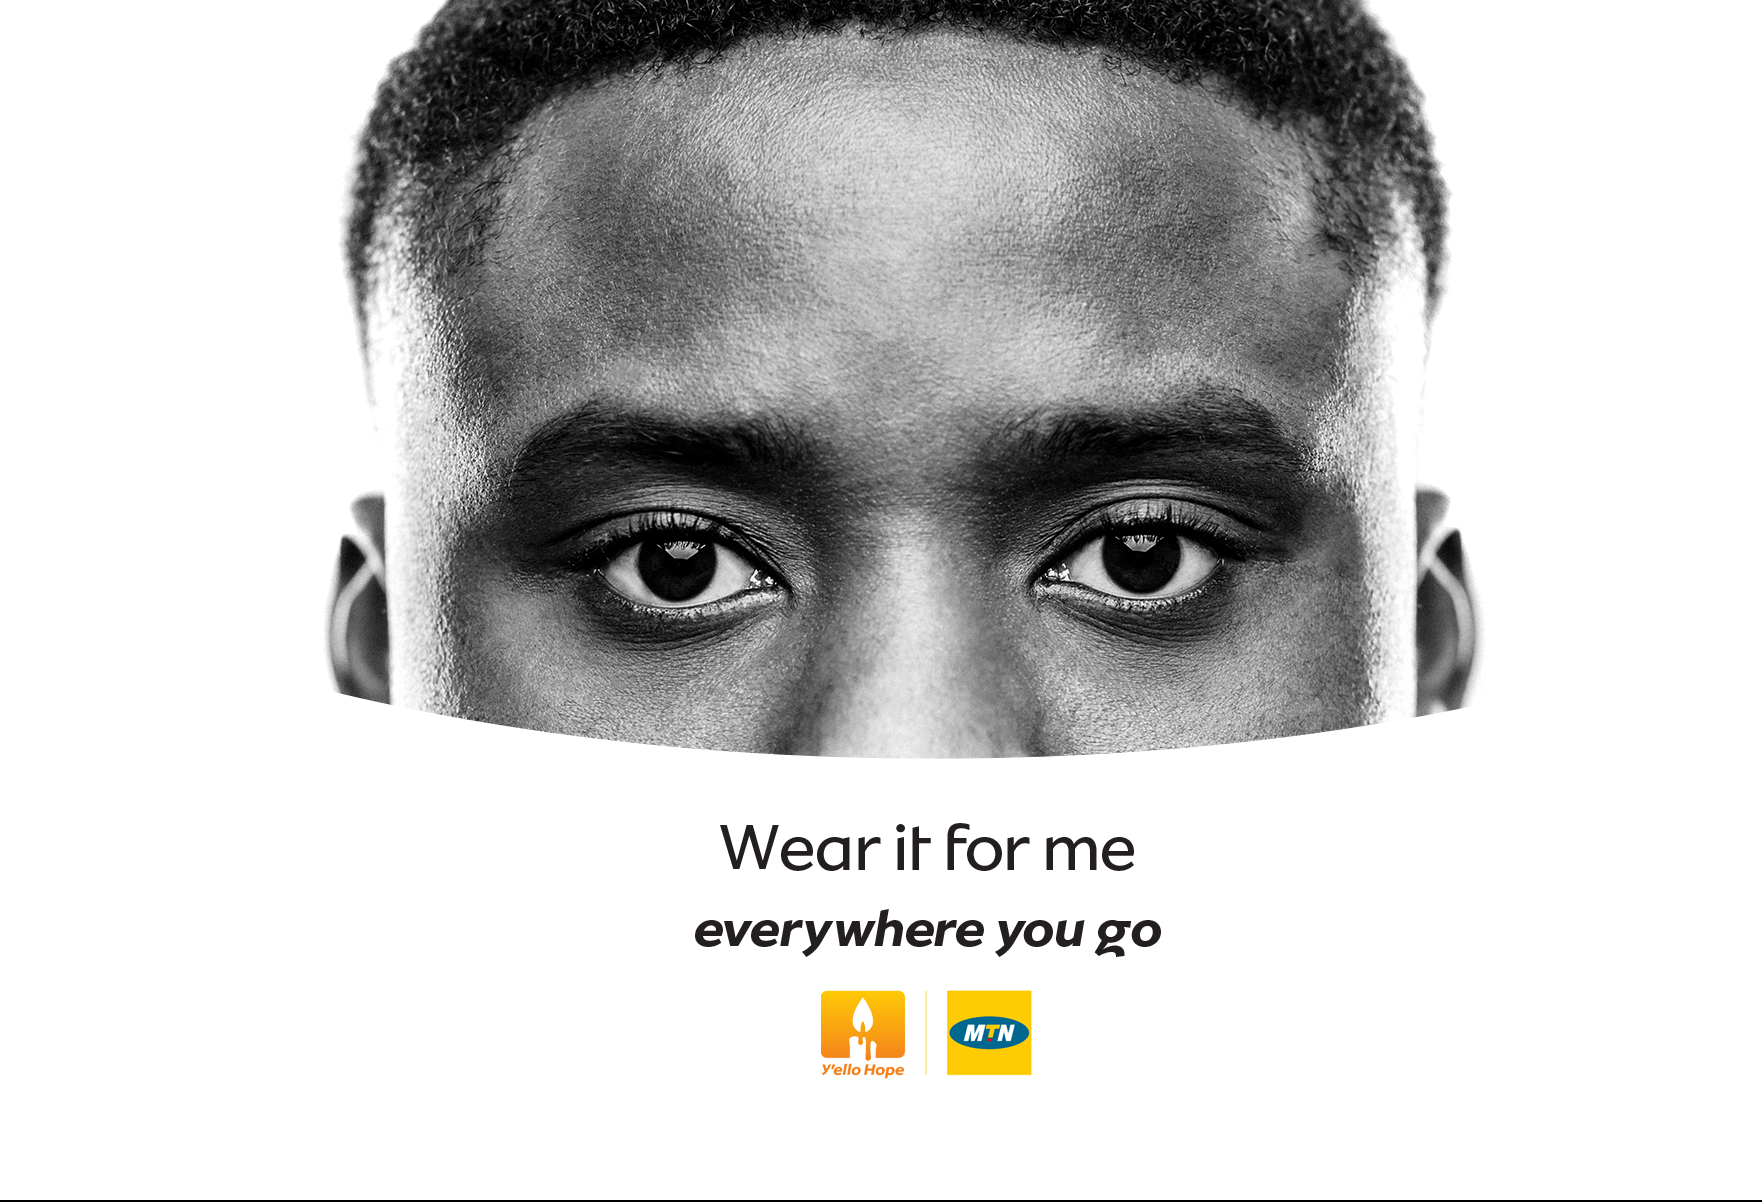 MTN steps up COVID fight with new campaign promoting mask-wearing